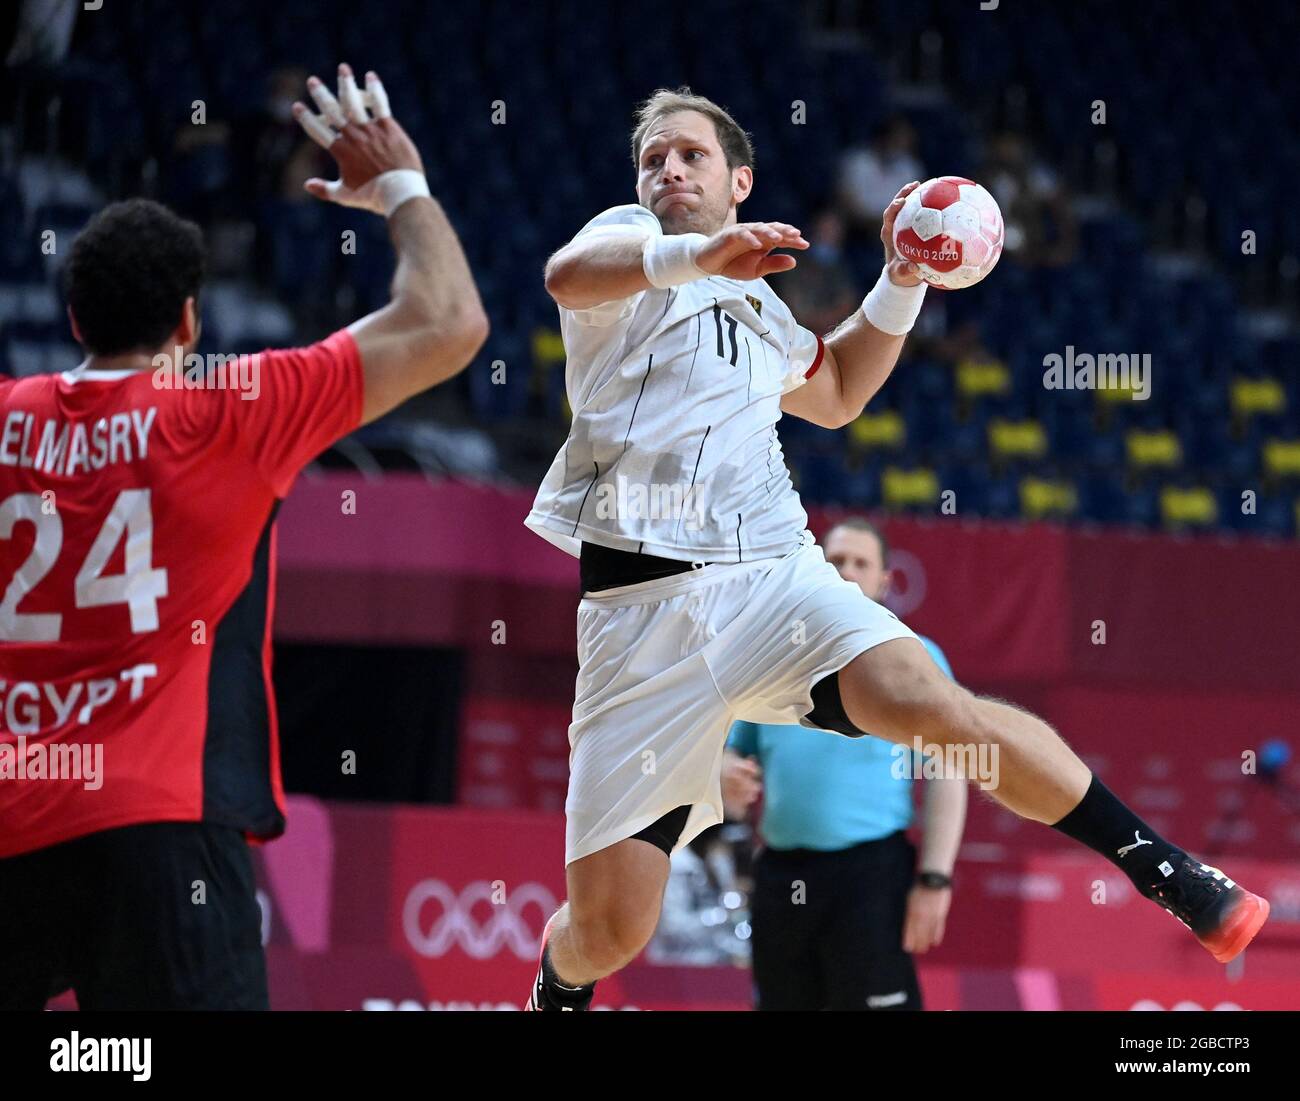 Tokyo. 3rd Aug, 2021. Steffen Weinhold (R) of Germany competes against Ibrahim Elmasry of Egypt during the handball men's quarterfinal between Germany and Egypt at Tokyo 2020 Olympic Games in Tokyo, Japan on Aug. 3, 2021. Credit: Guo Chen/Xinhua/Alamy Live News Stock Photo